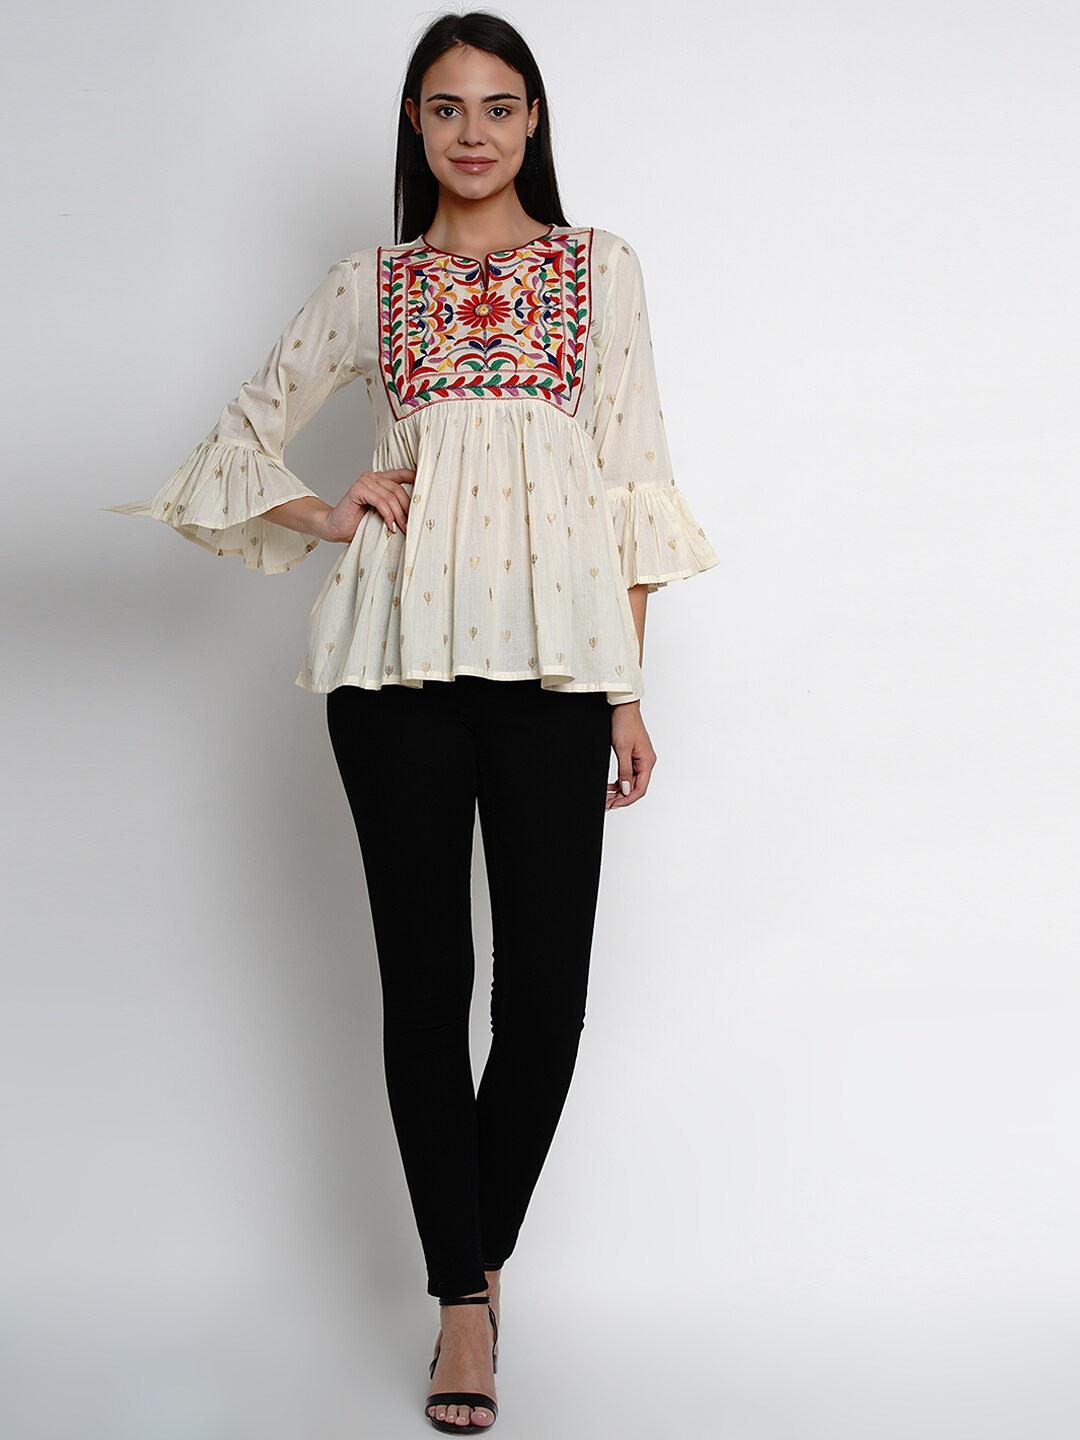 Women's  Off-White & Red Embroidered Peplum Top - Wahe-NOOR